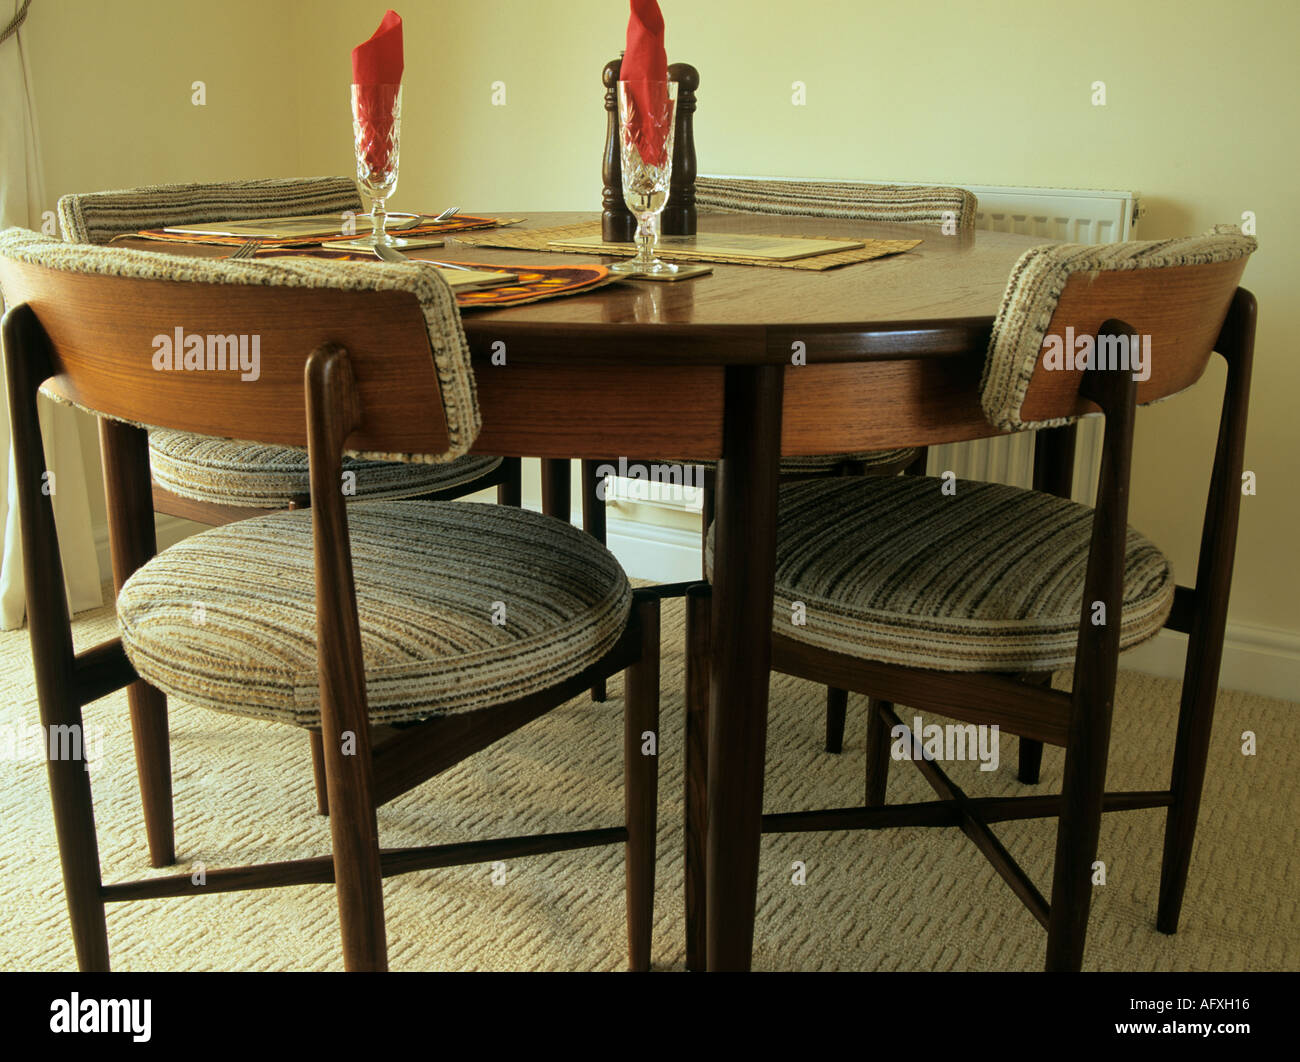 STUDIO STILL LIFE Image of a Dining room table laid for two people to dine but chairs are unoccupied Stock Photo